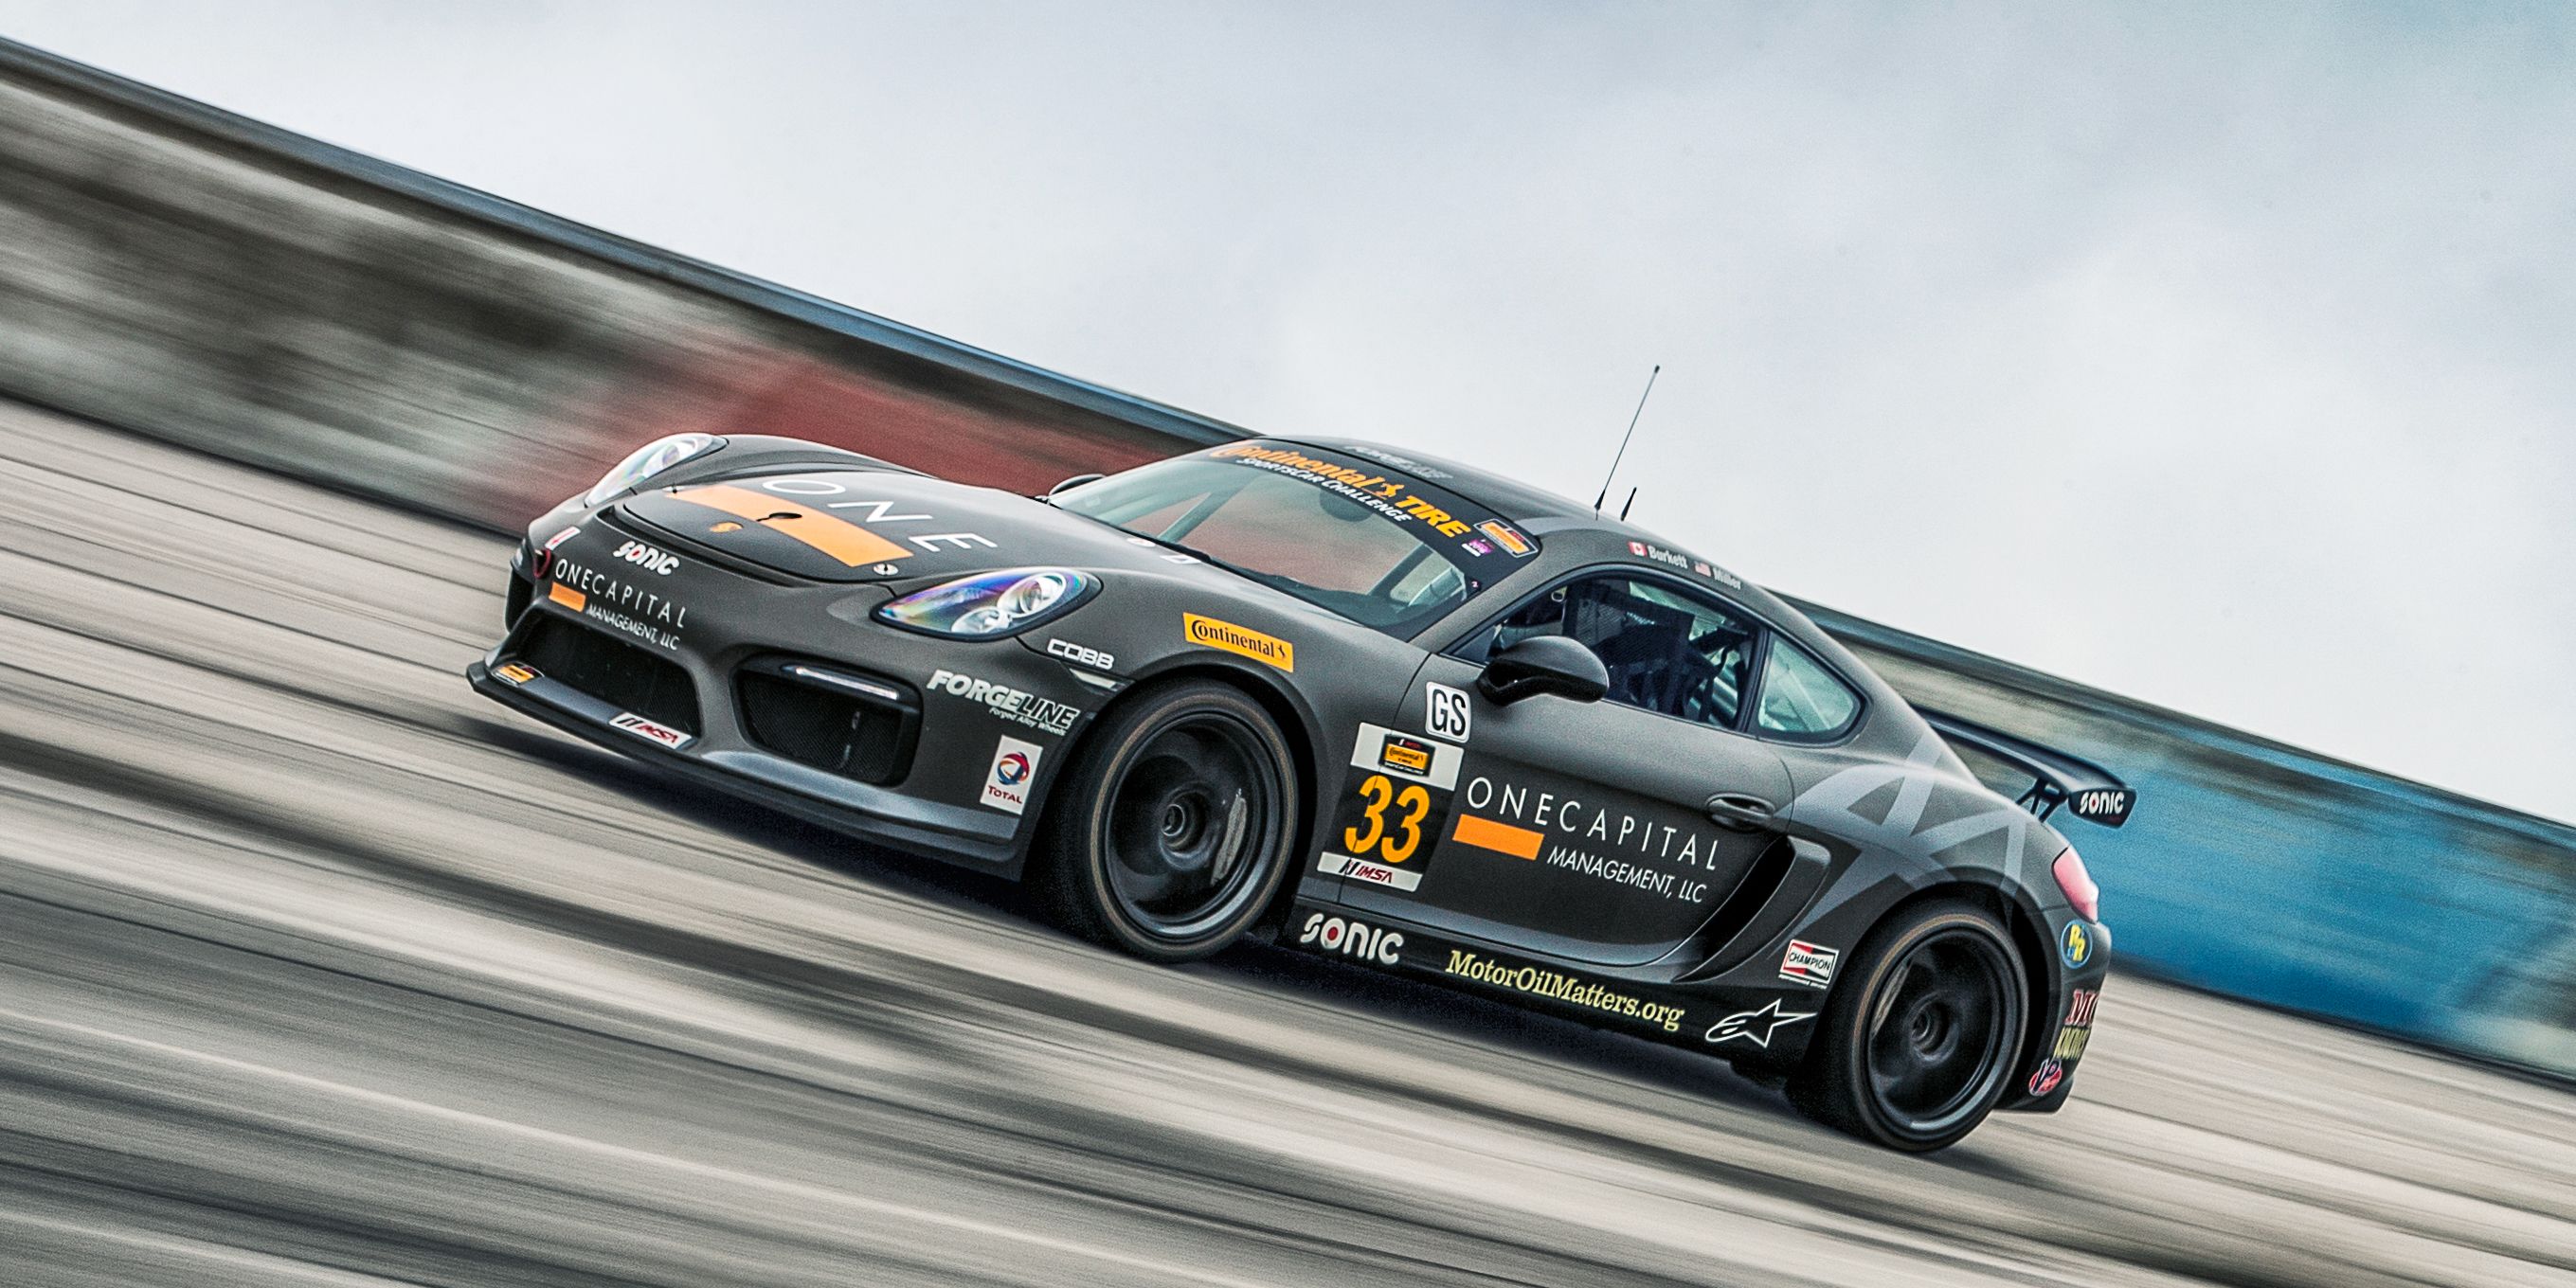 The 2016 Porsche Cayman GT4 Clubsport Is a Race Car for the Every(ish)man